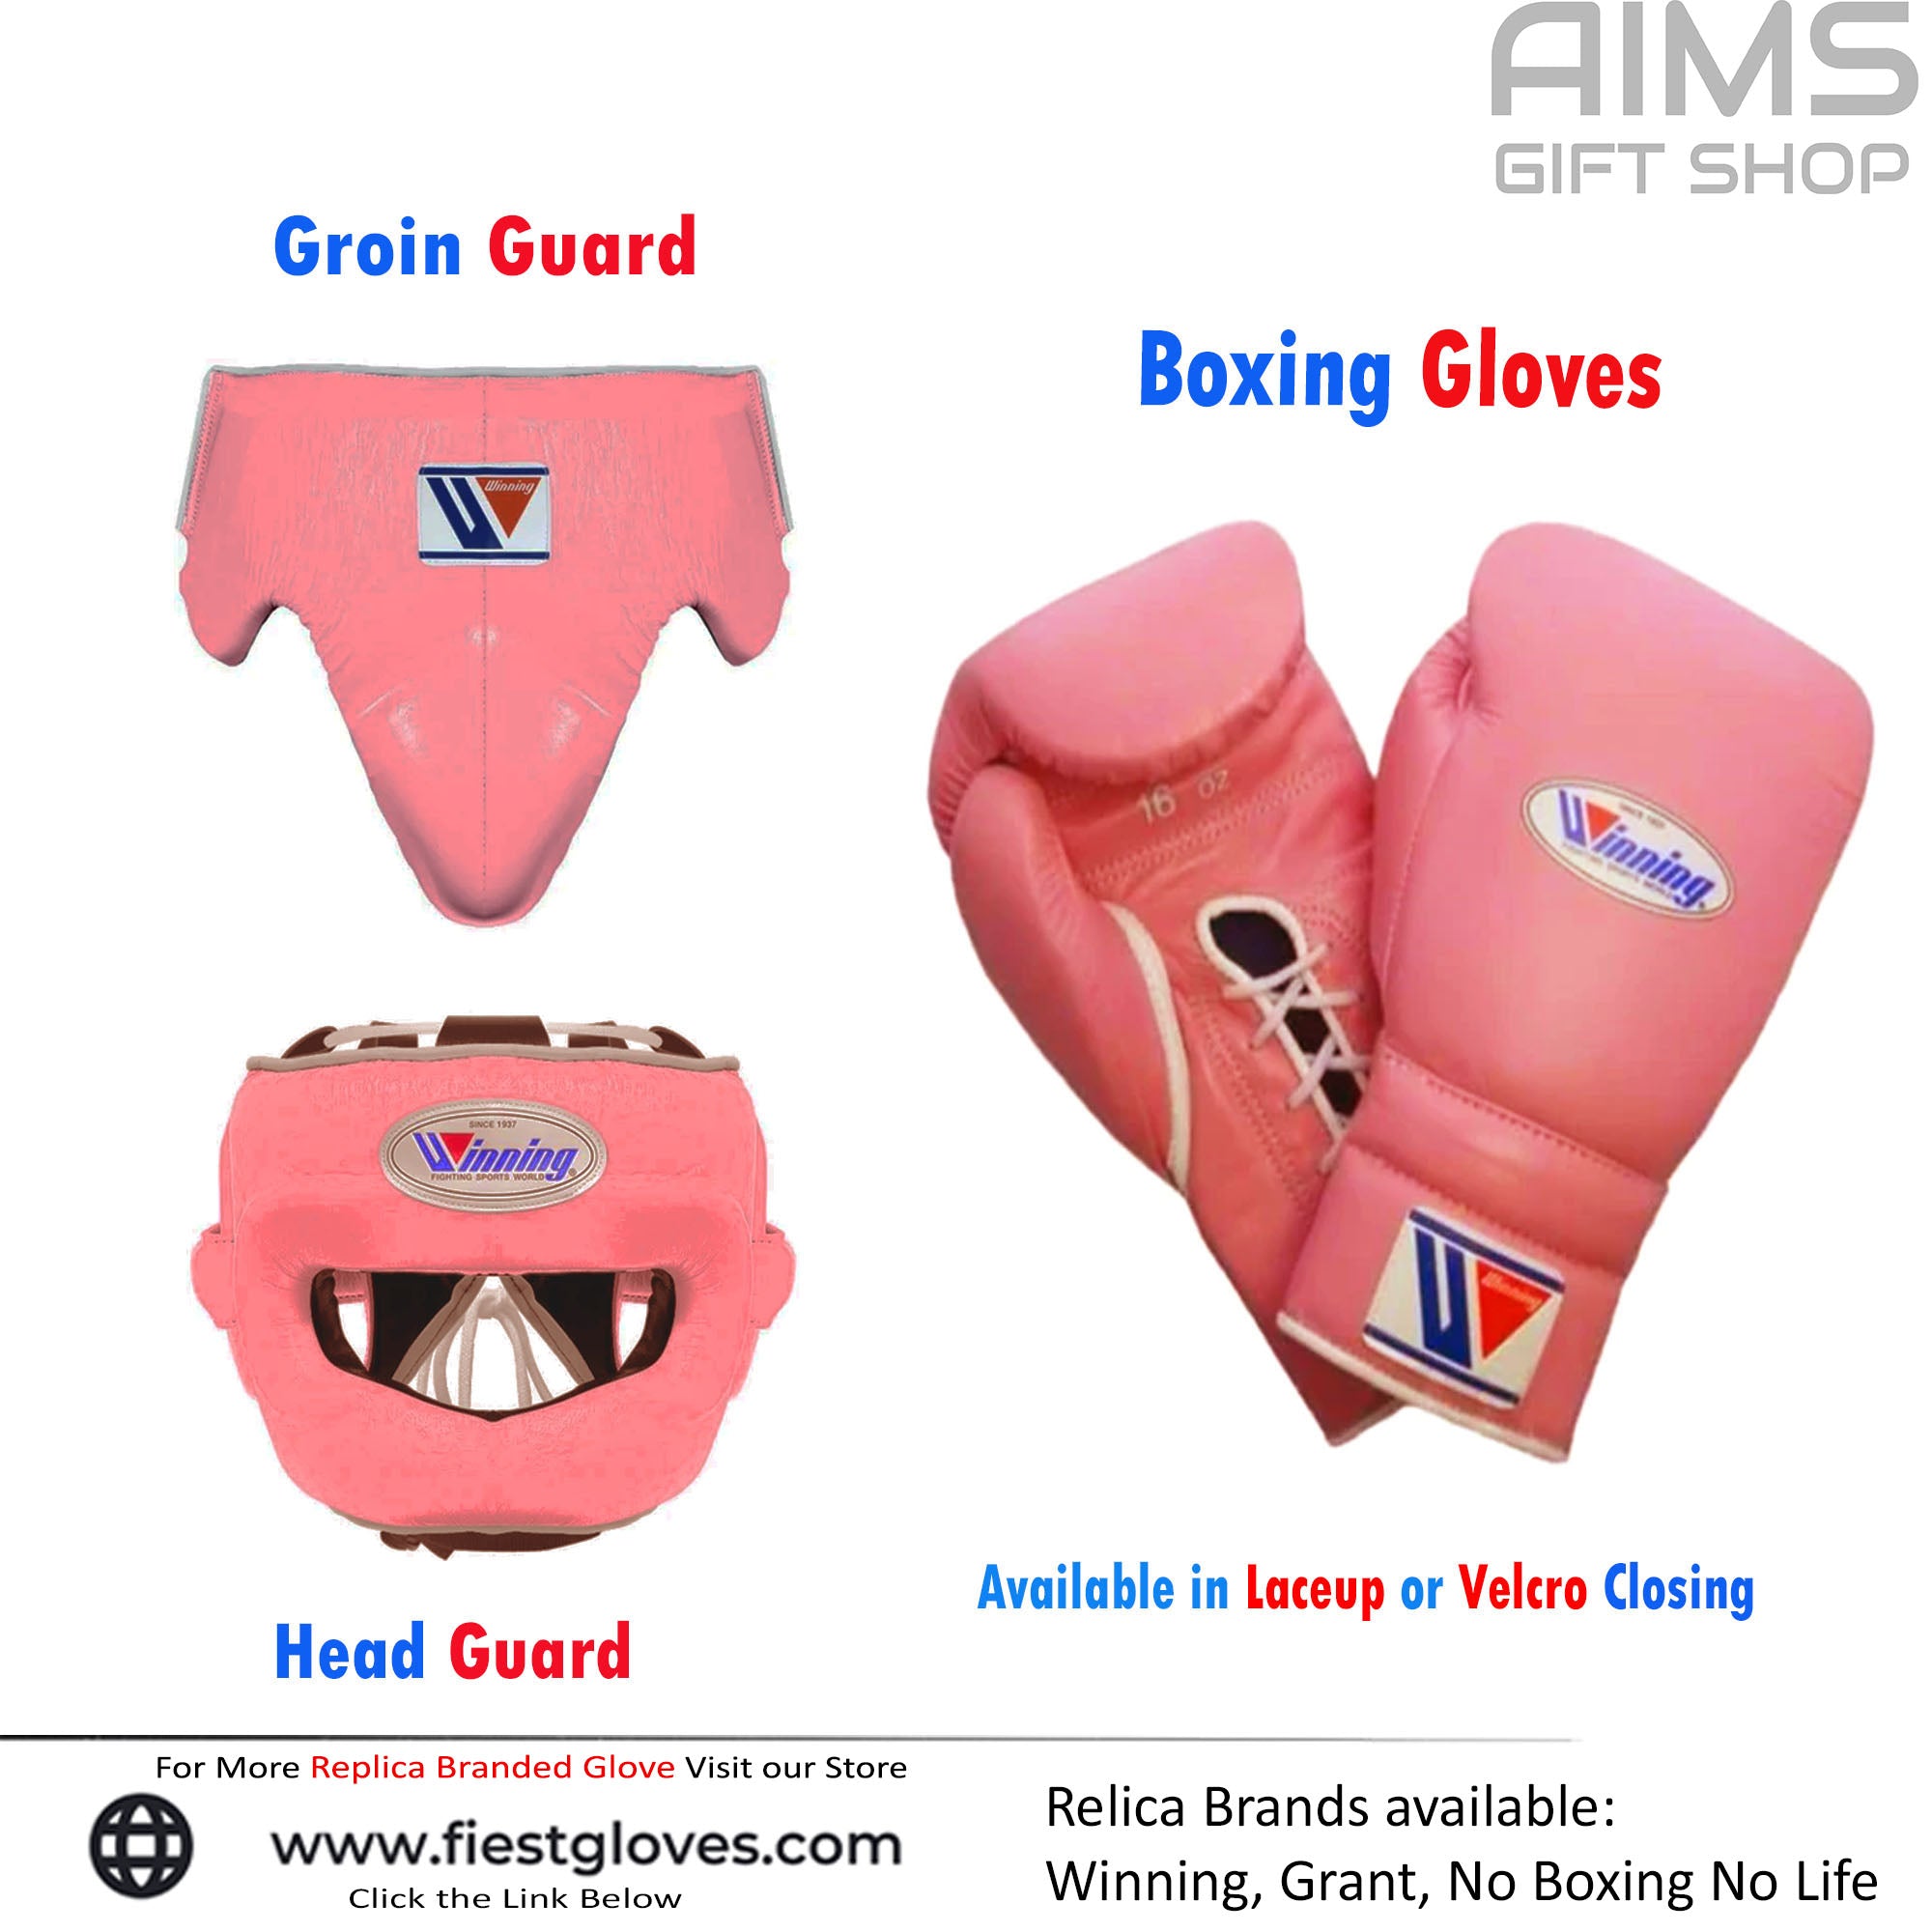 Winning boxing glove, winning boxing set, grant boxing glove, grant velcro gloves, winning velcro glove, clete reyes boxing, No boxing no life glove, Christmas gift for mens, Thanksgiving gift for her, Anniversary gifts for him, wedding gifts